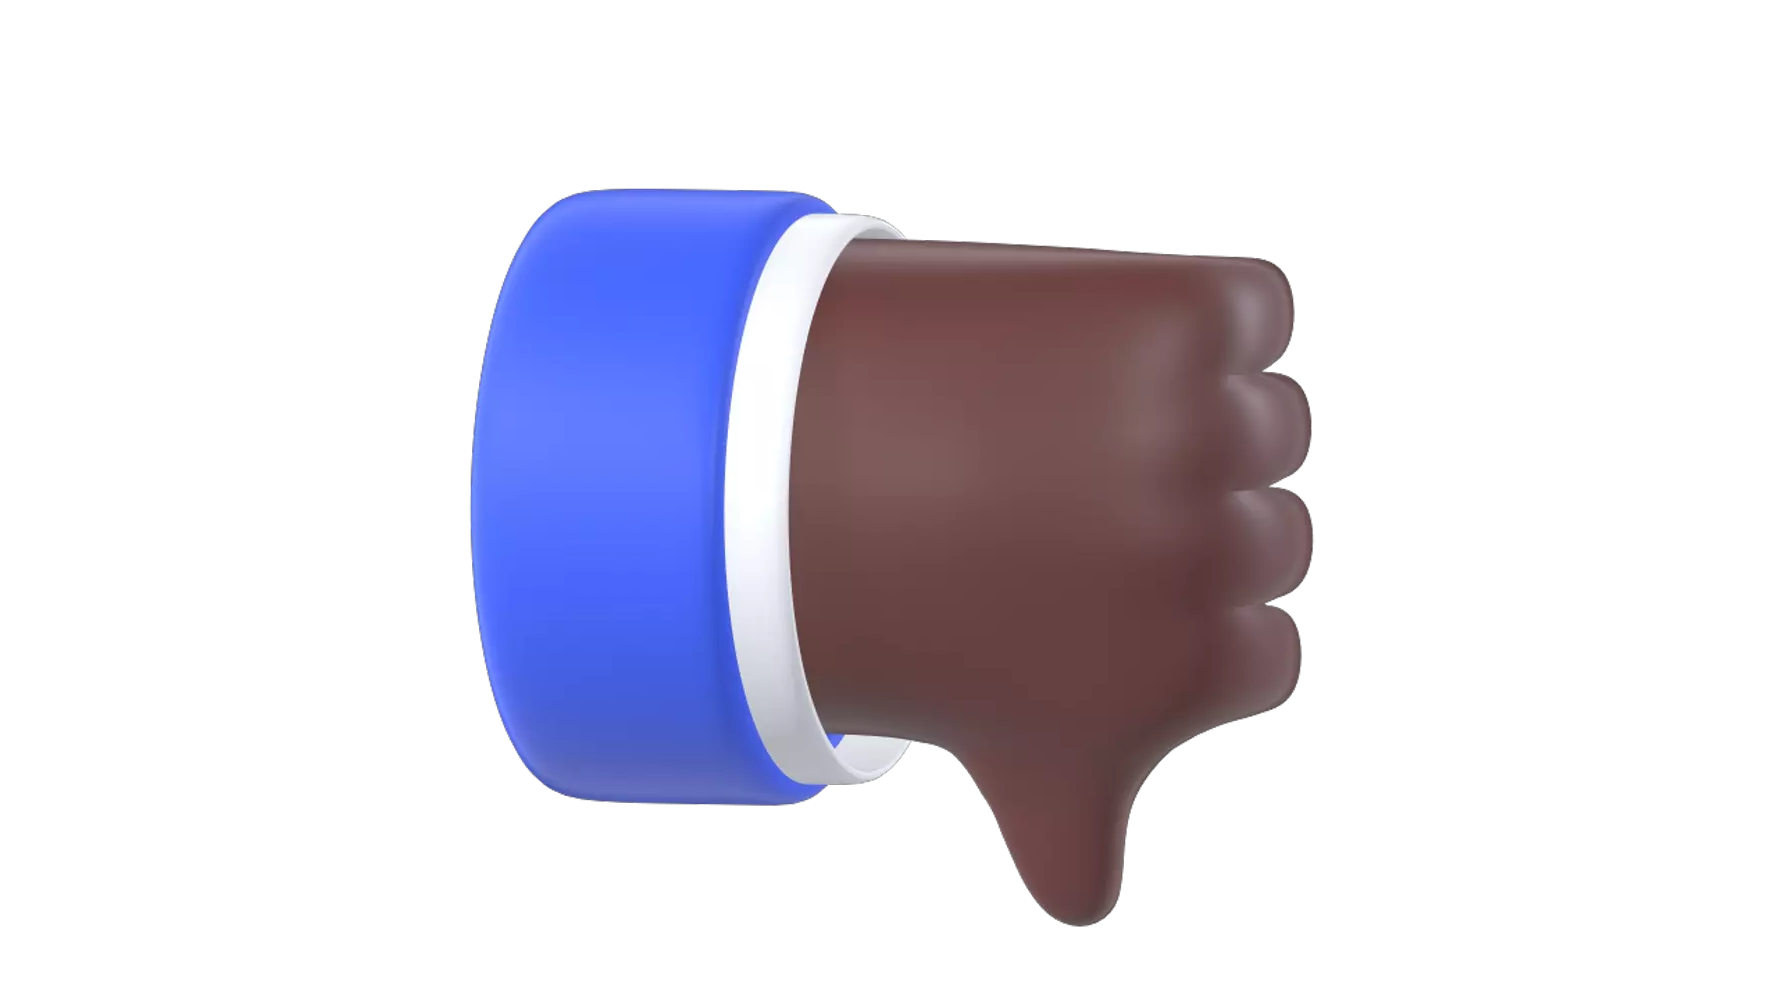 Thumb Down 3D Graphic